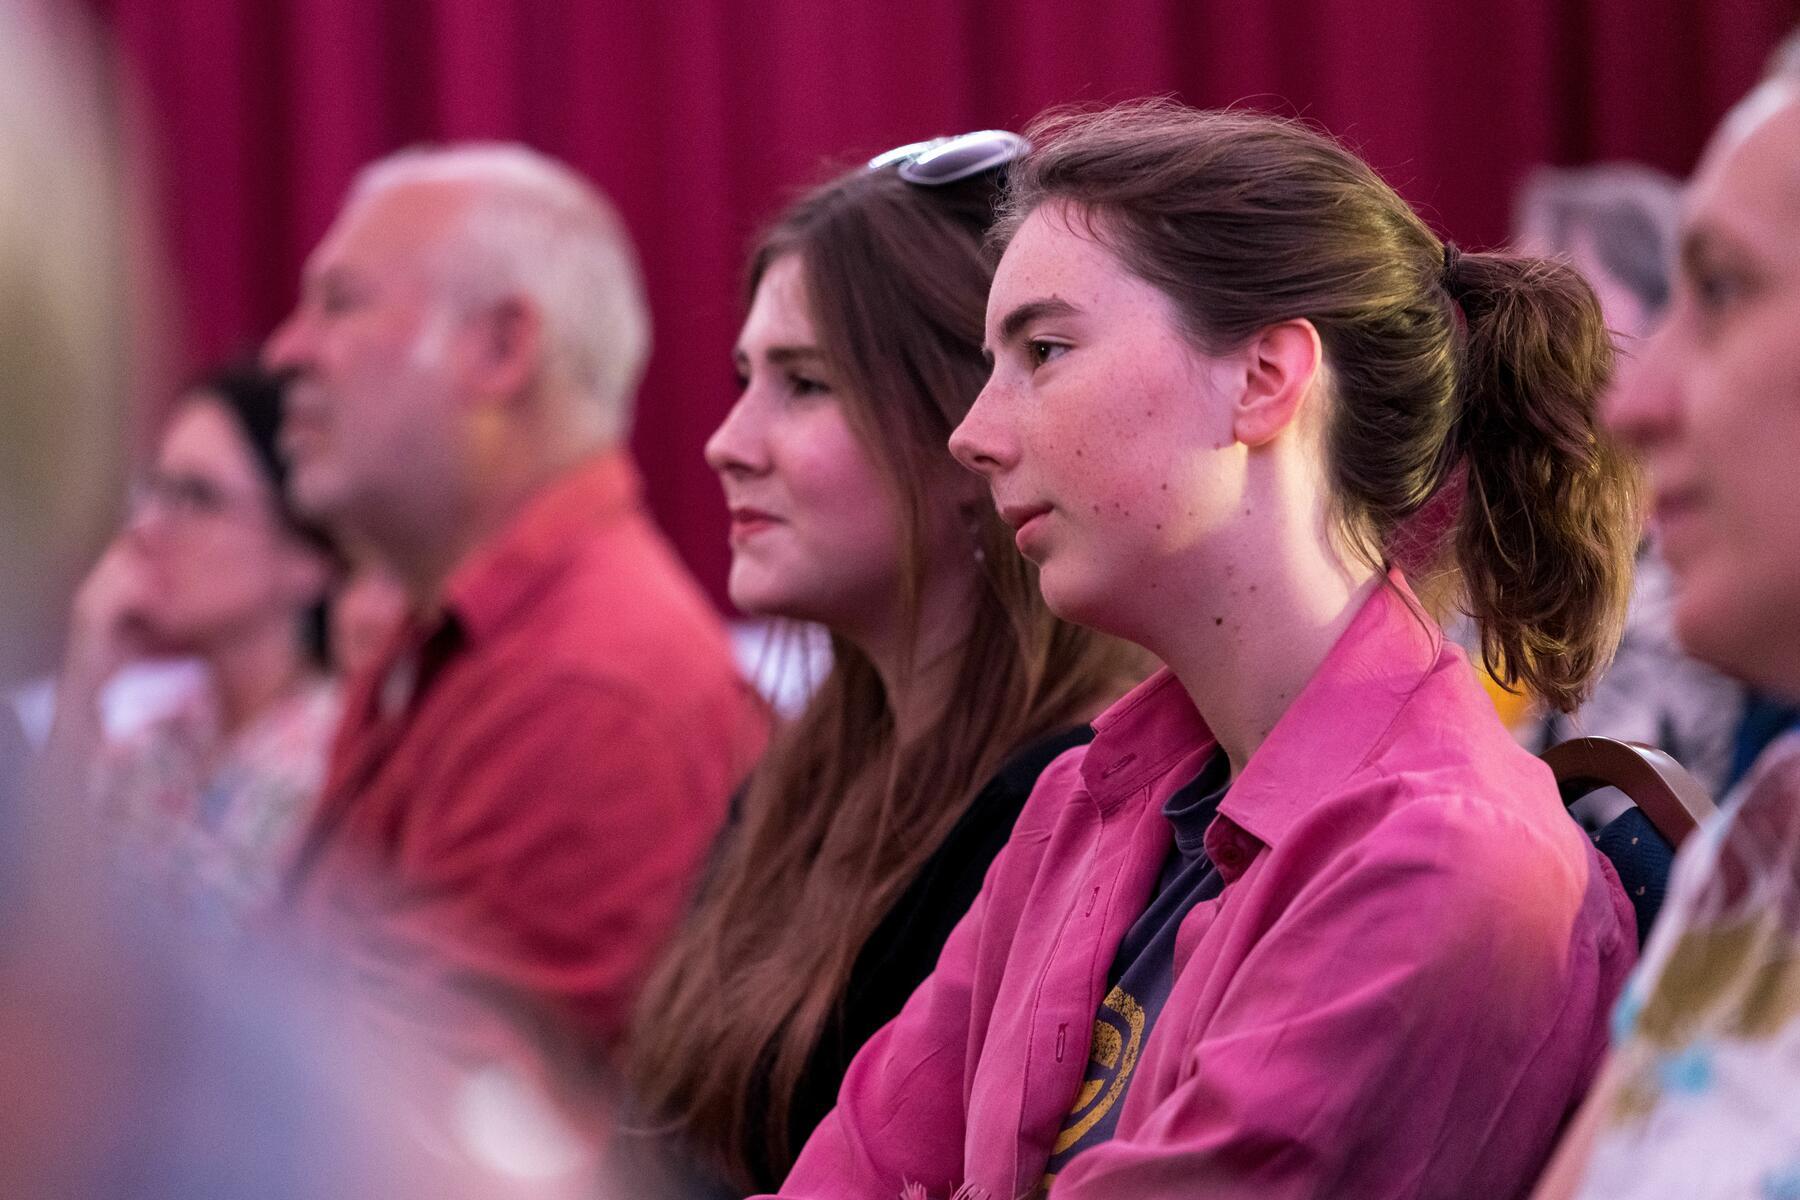 Audience listening to Chris Riddell